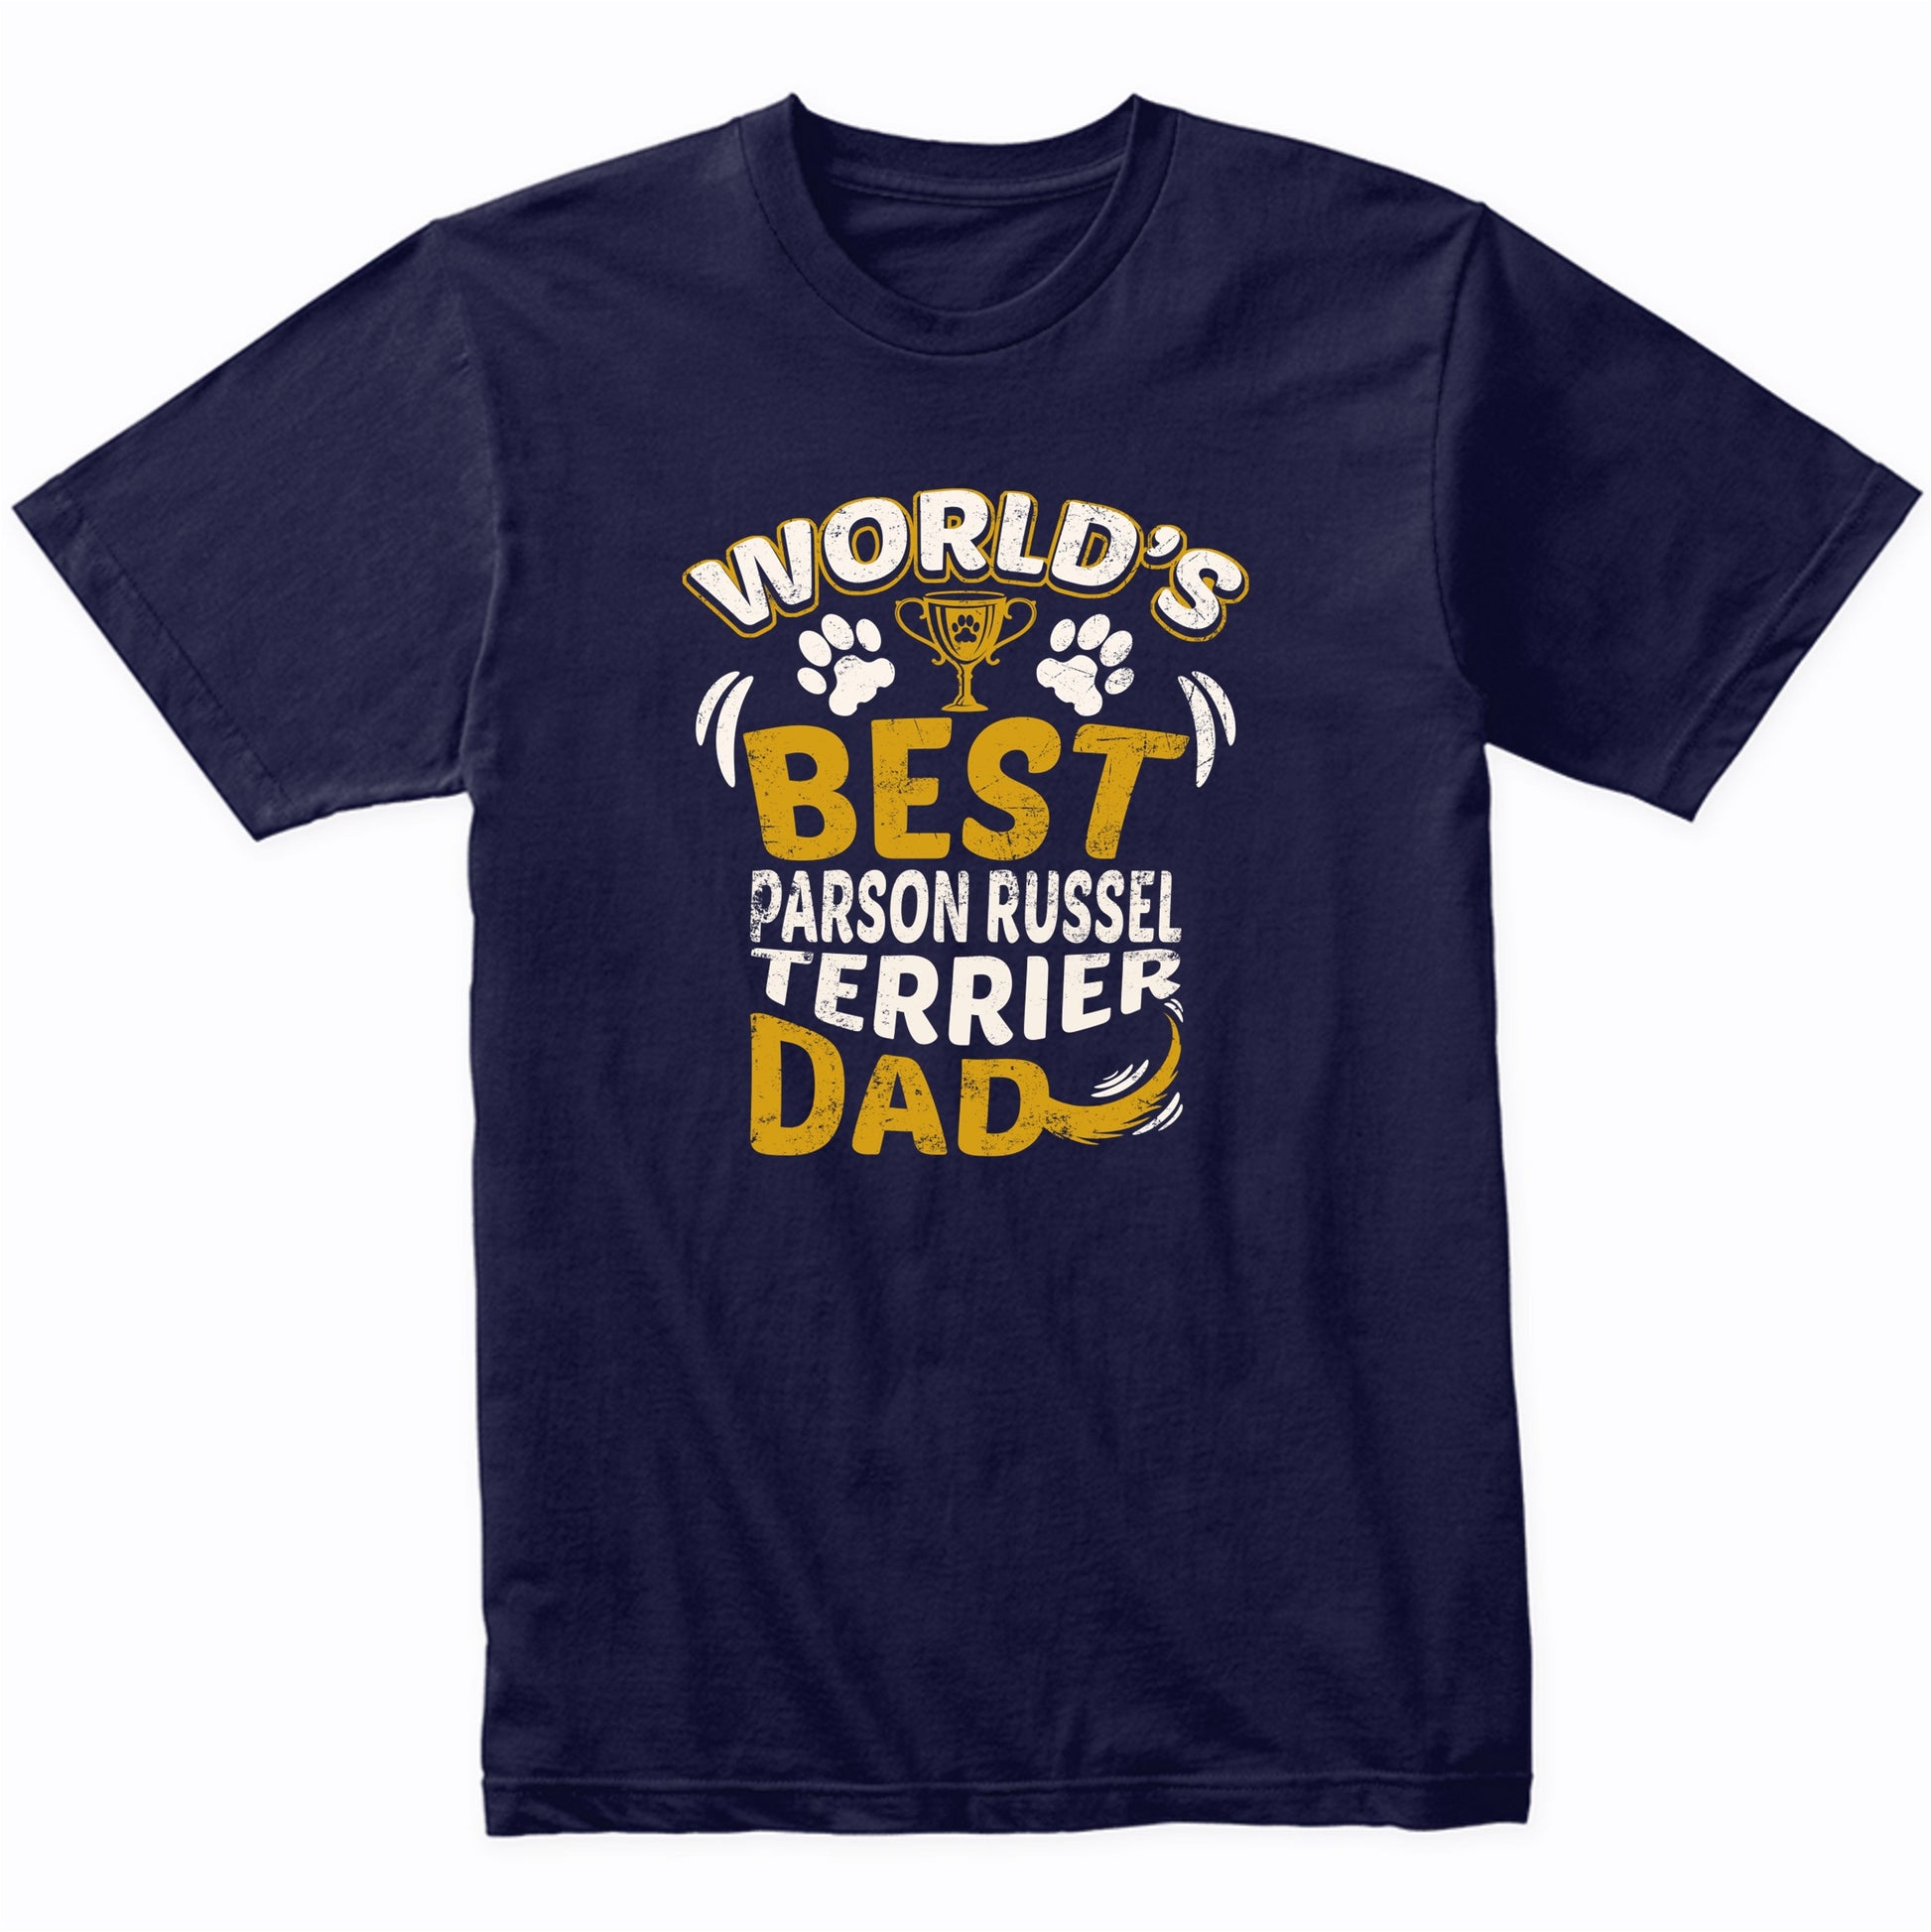 World's Best Parson Russell Terrier Dad Graphic T-Shirt